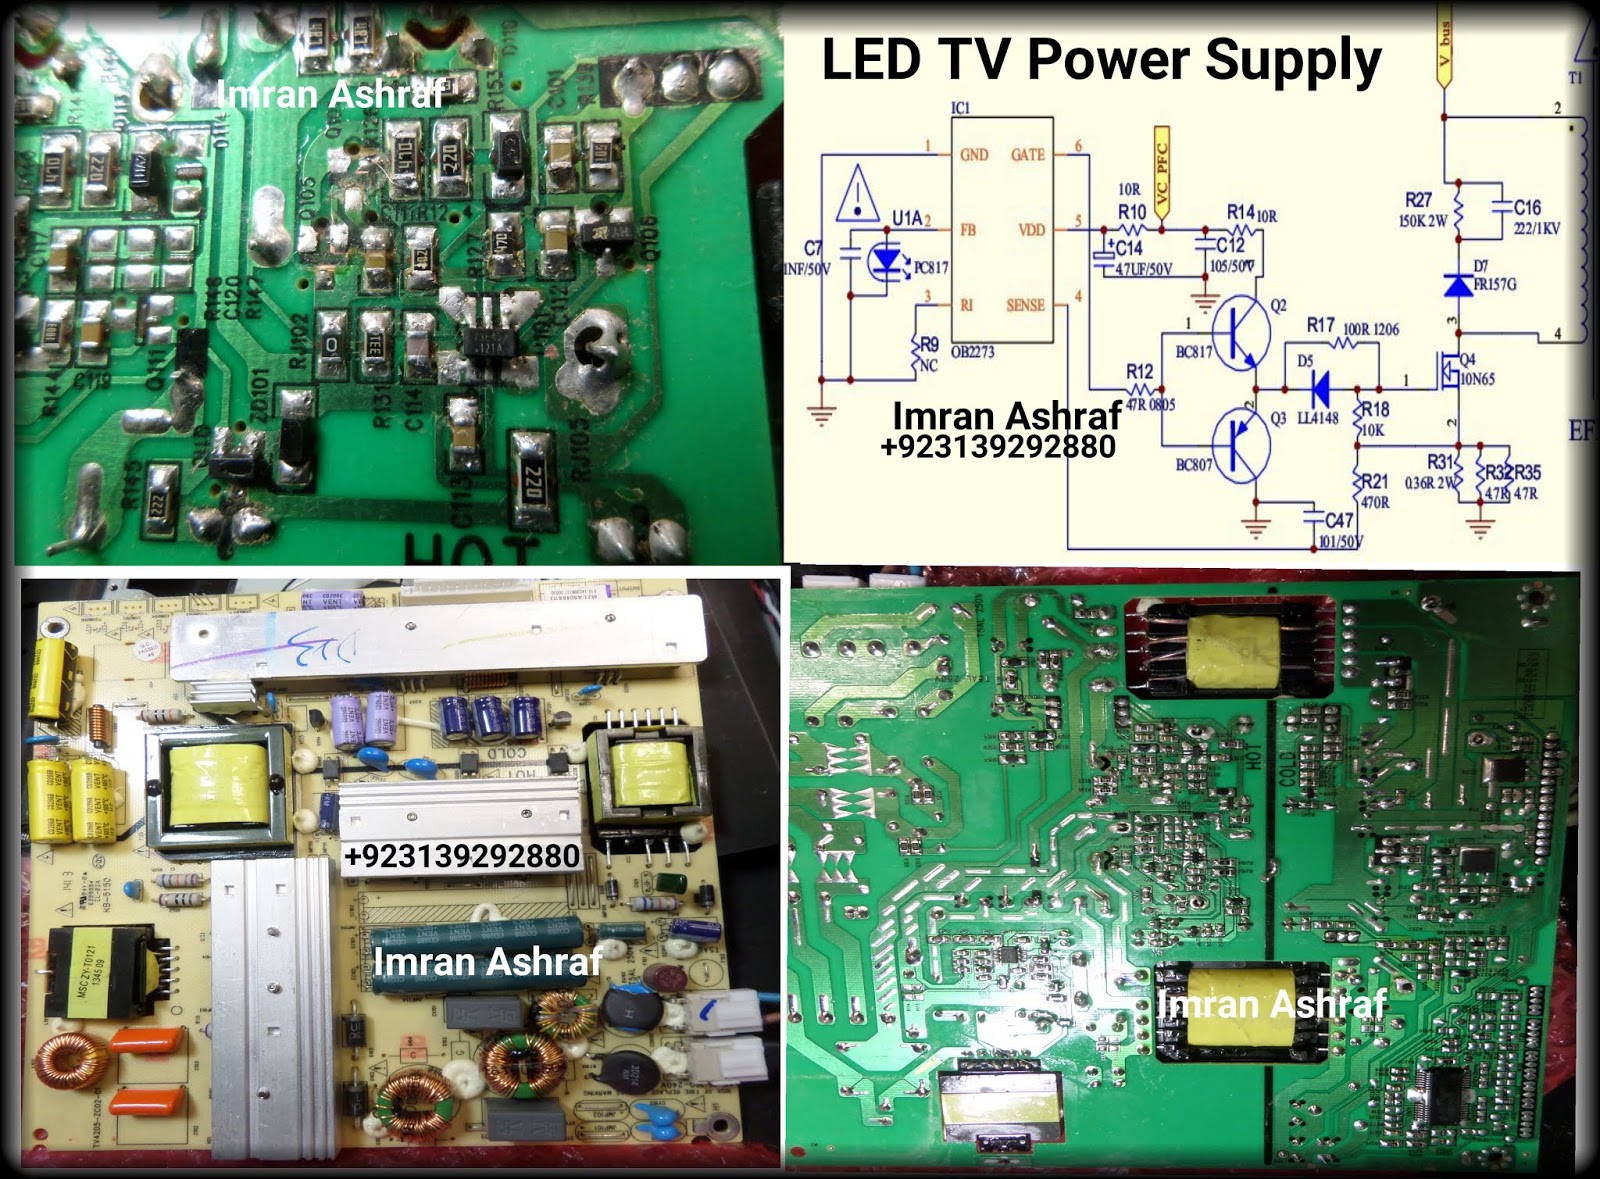 LED TV Repair Training Books : LED TV Mainboard Voltages Guide